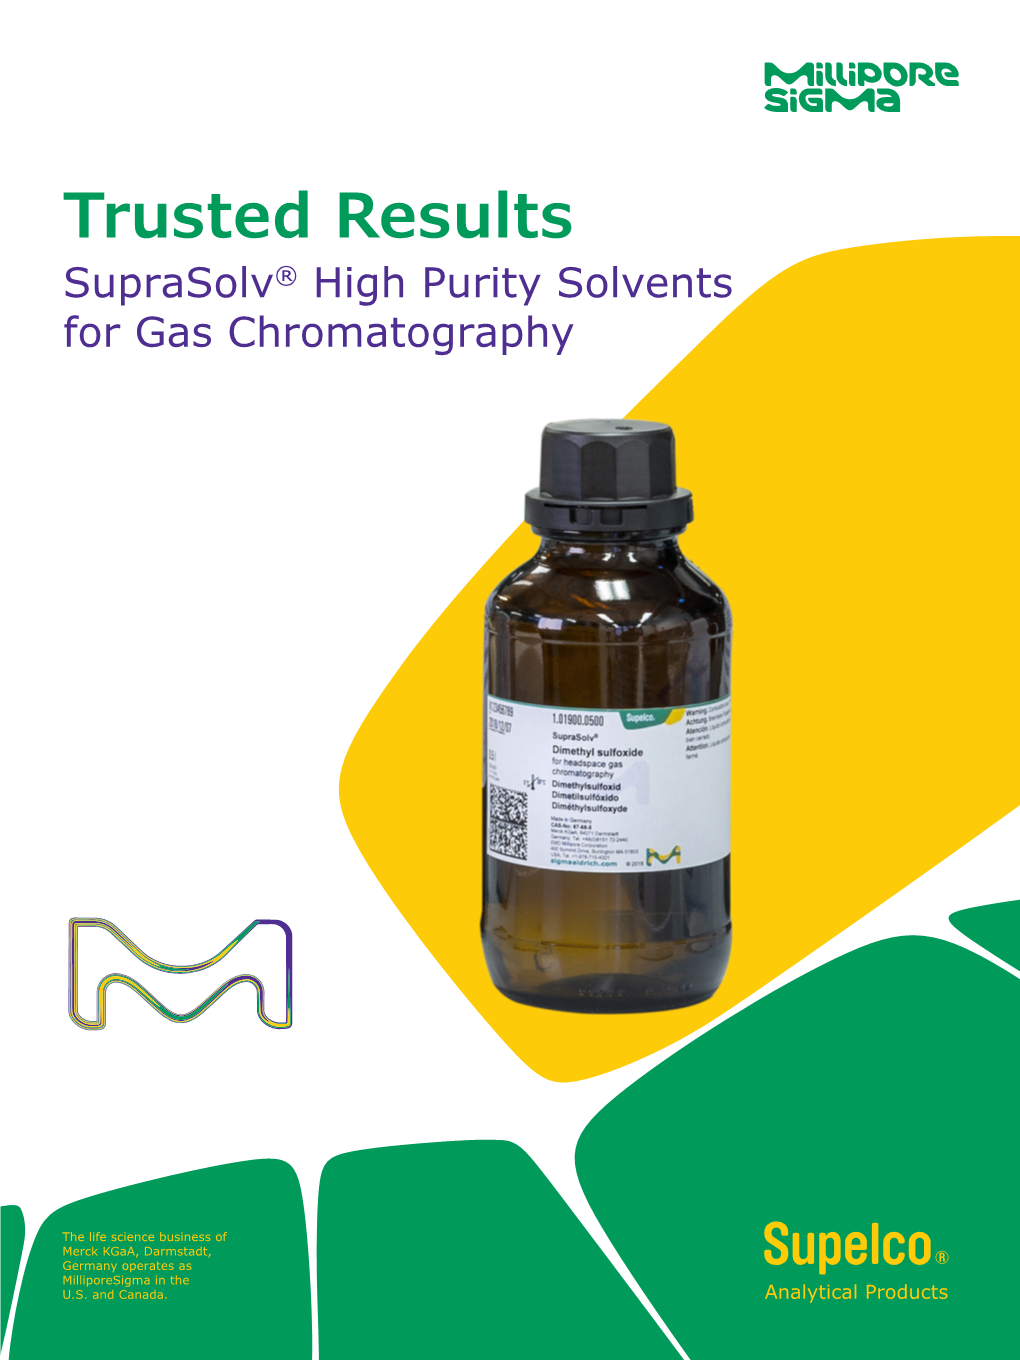 Trusted Results Suprasolv® High Purity Solvents for Gas Chromatography